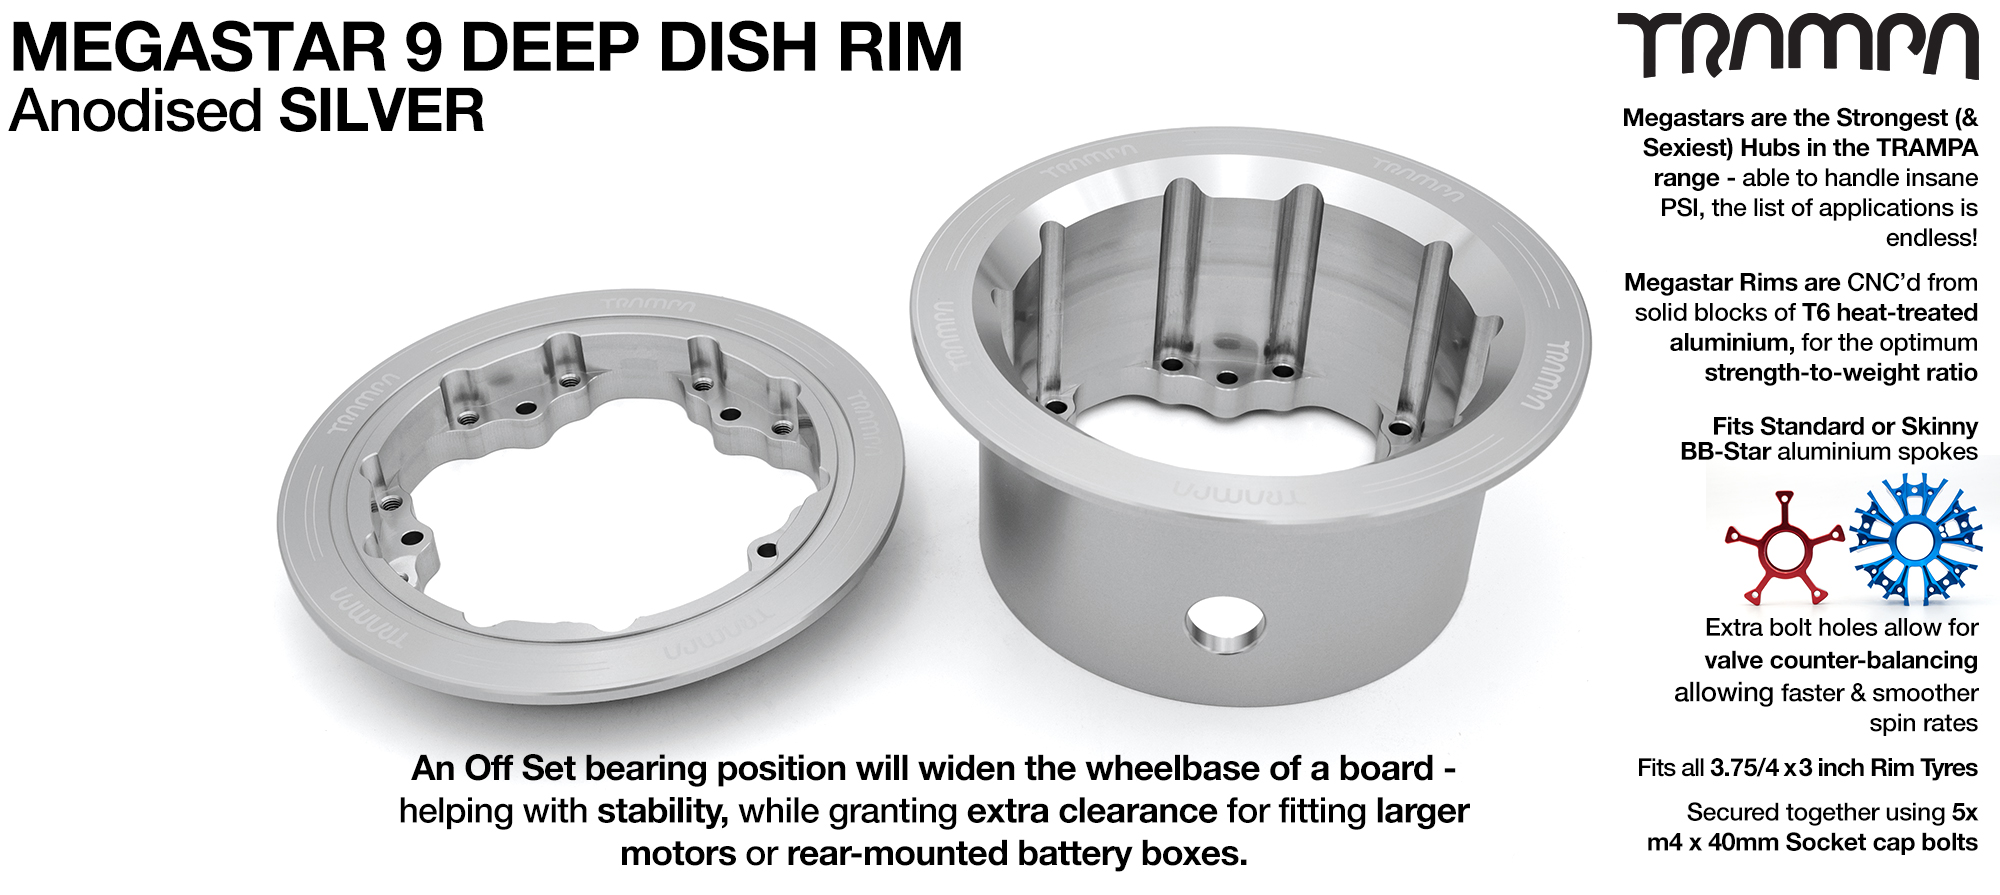 MEGASTAR 9 DEEP-DISH Rims Measure 3.75/4x 3 Inch. The Bearings are positioned OFF-SET & accept 4 Inch Rim Tyres to make 9 or 10 inch Wheels - SILVER